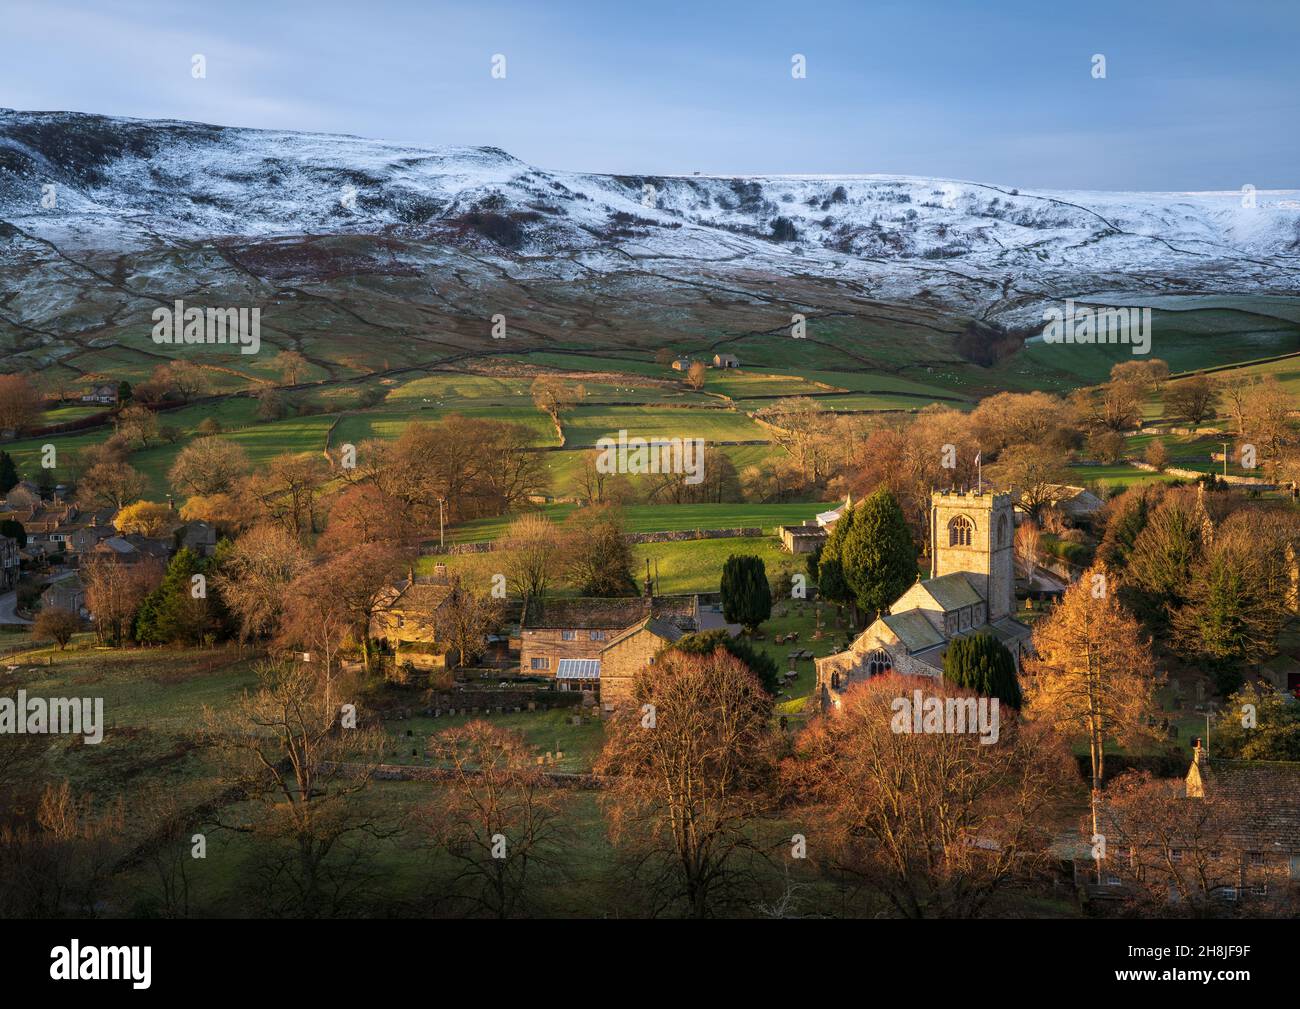 A brief burst of light at sunrise illuminates St. Wilfrid's Church in the pretty village of Burnsall with the hills behind covered in early snowfall. Stock Photo